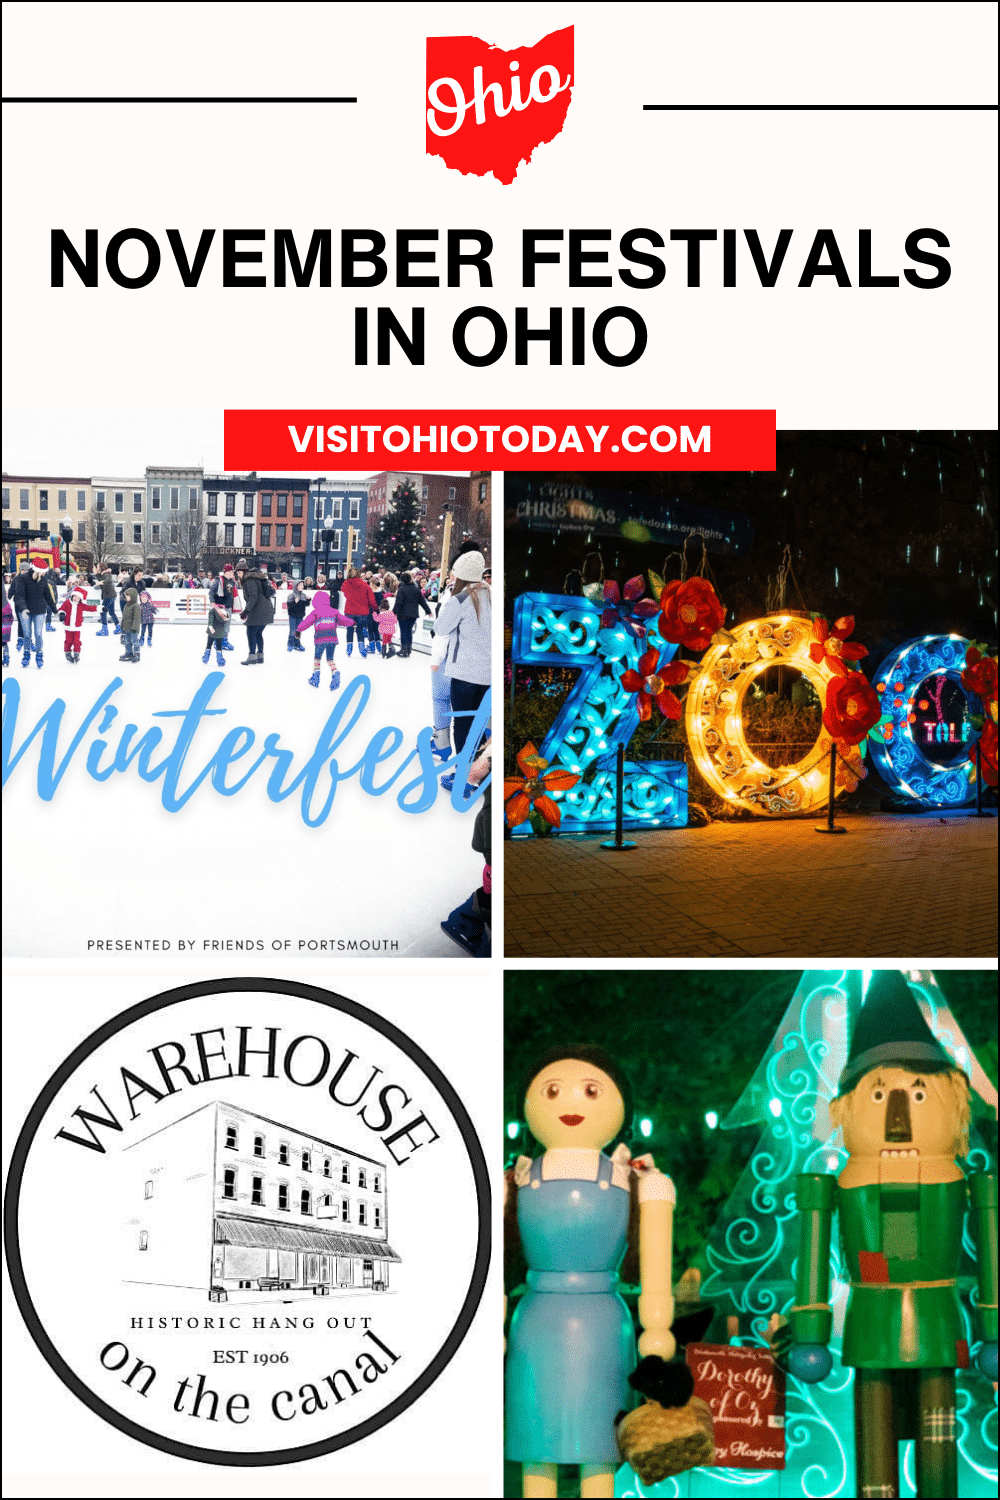 A vertical image for Pinterest of 4 photos of festivals occurring in November in Ohio. The pictures depict a scene from Winterfest, Lights at the Zoo, an image of Warehouse on the Canal, and 2 giant nutcrackers. A white block at the top has text November Festivals in Ohio. A red block underneath has text VisitOhioToday.com